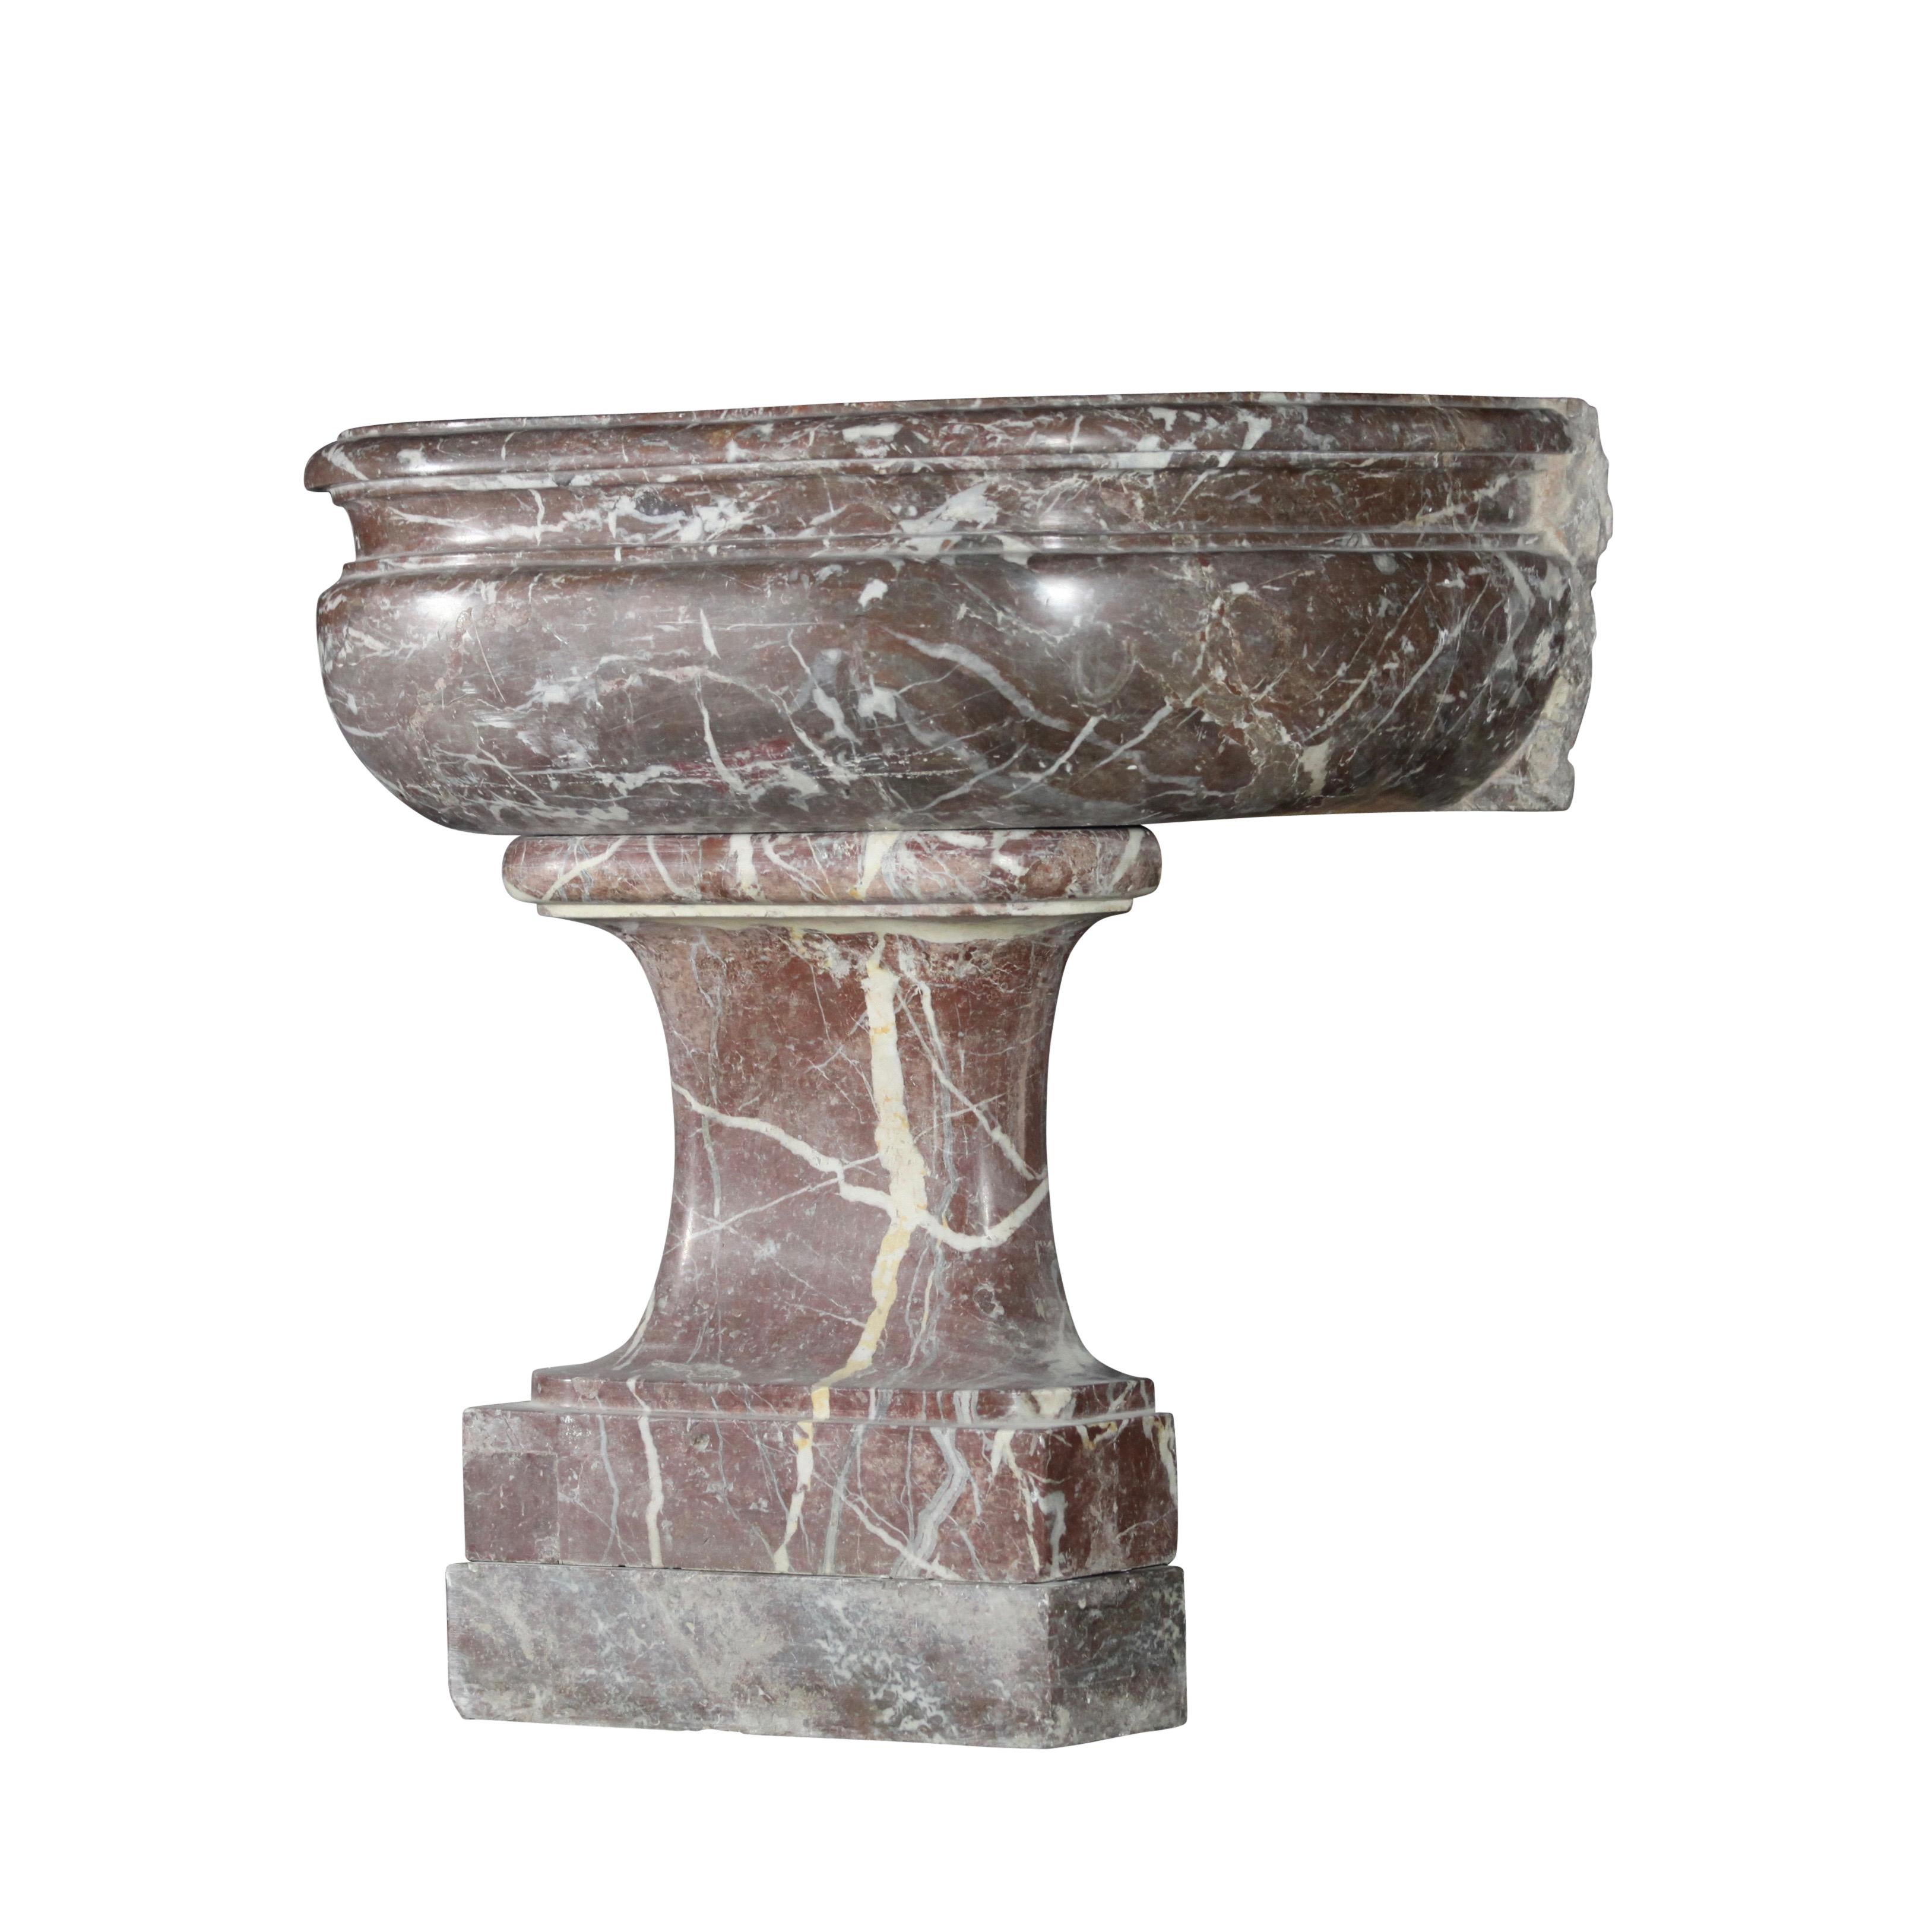 Original antique wine cooler from the Louis XIV period in Rouge Royal marble. This amazing piece has great measurements. Perfect for a hand washer in a powder room or to plant flowers in in a hall.
Or to be used as a sink,
18th century